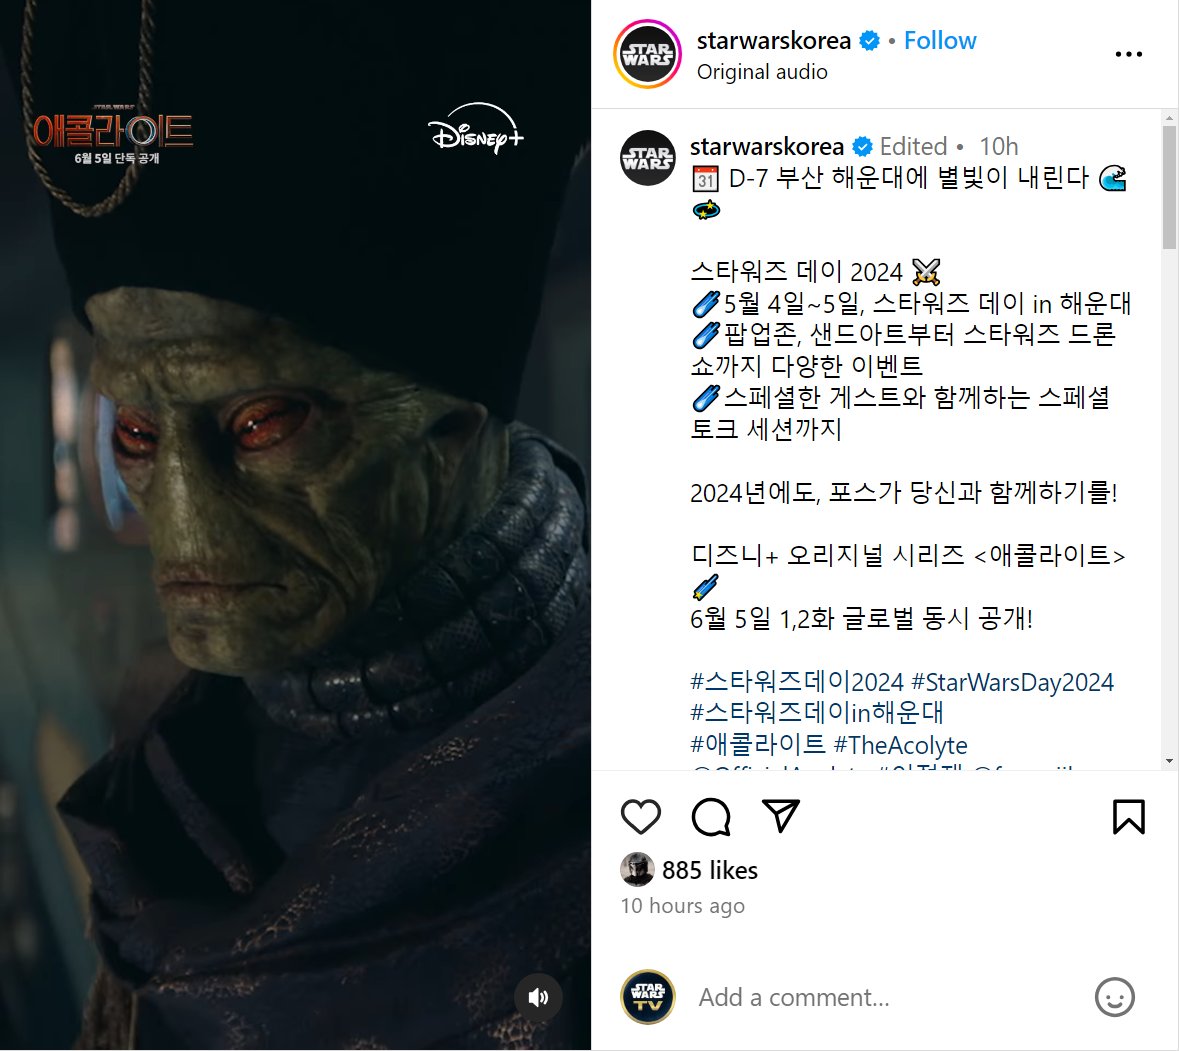 First look at a Neimoidian in #TheAcolyte from StarWarsKorea on Instagram!